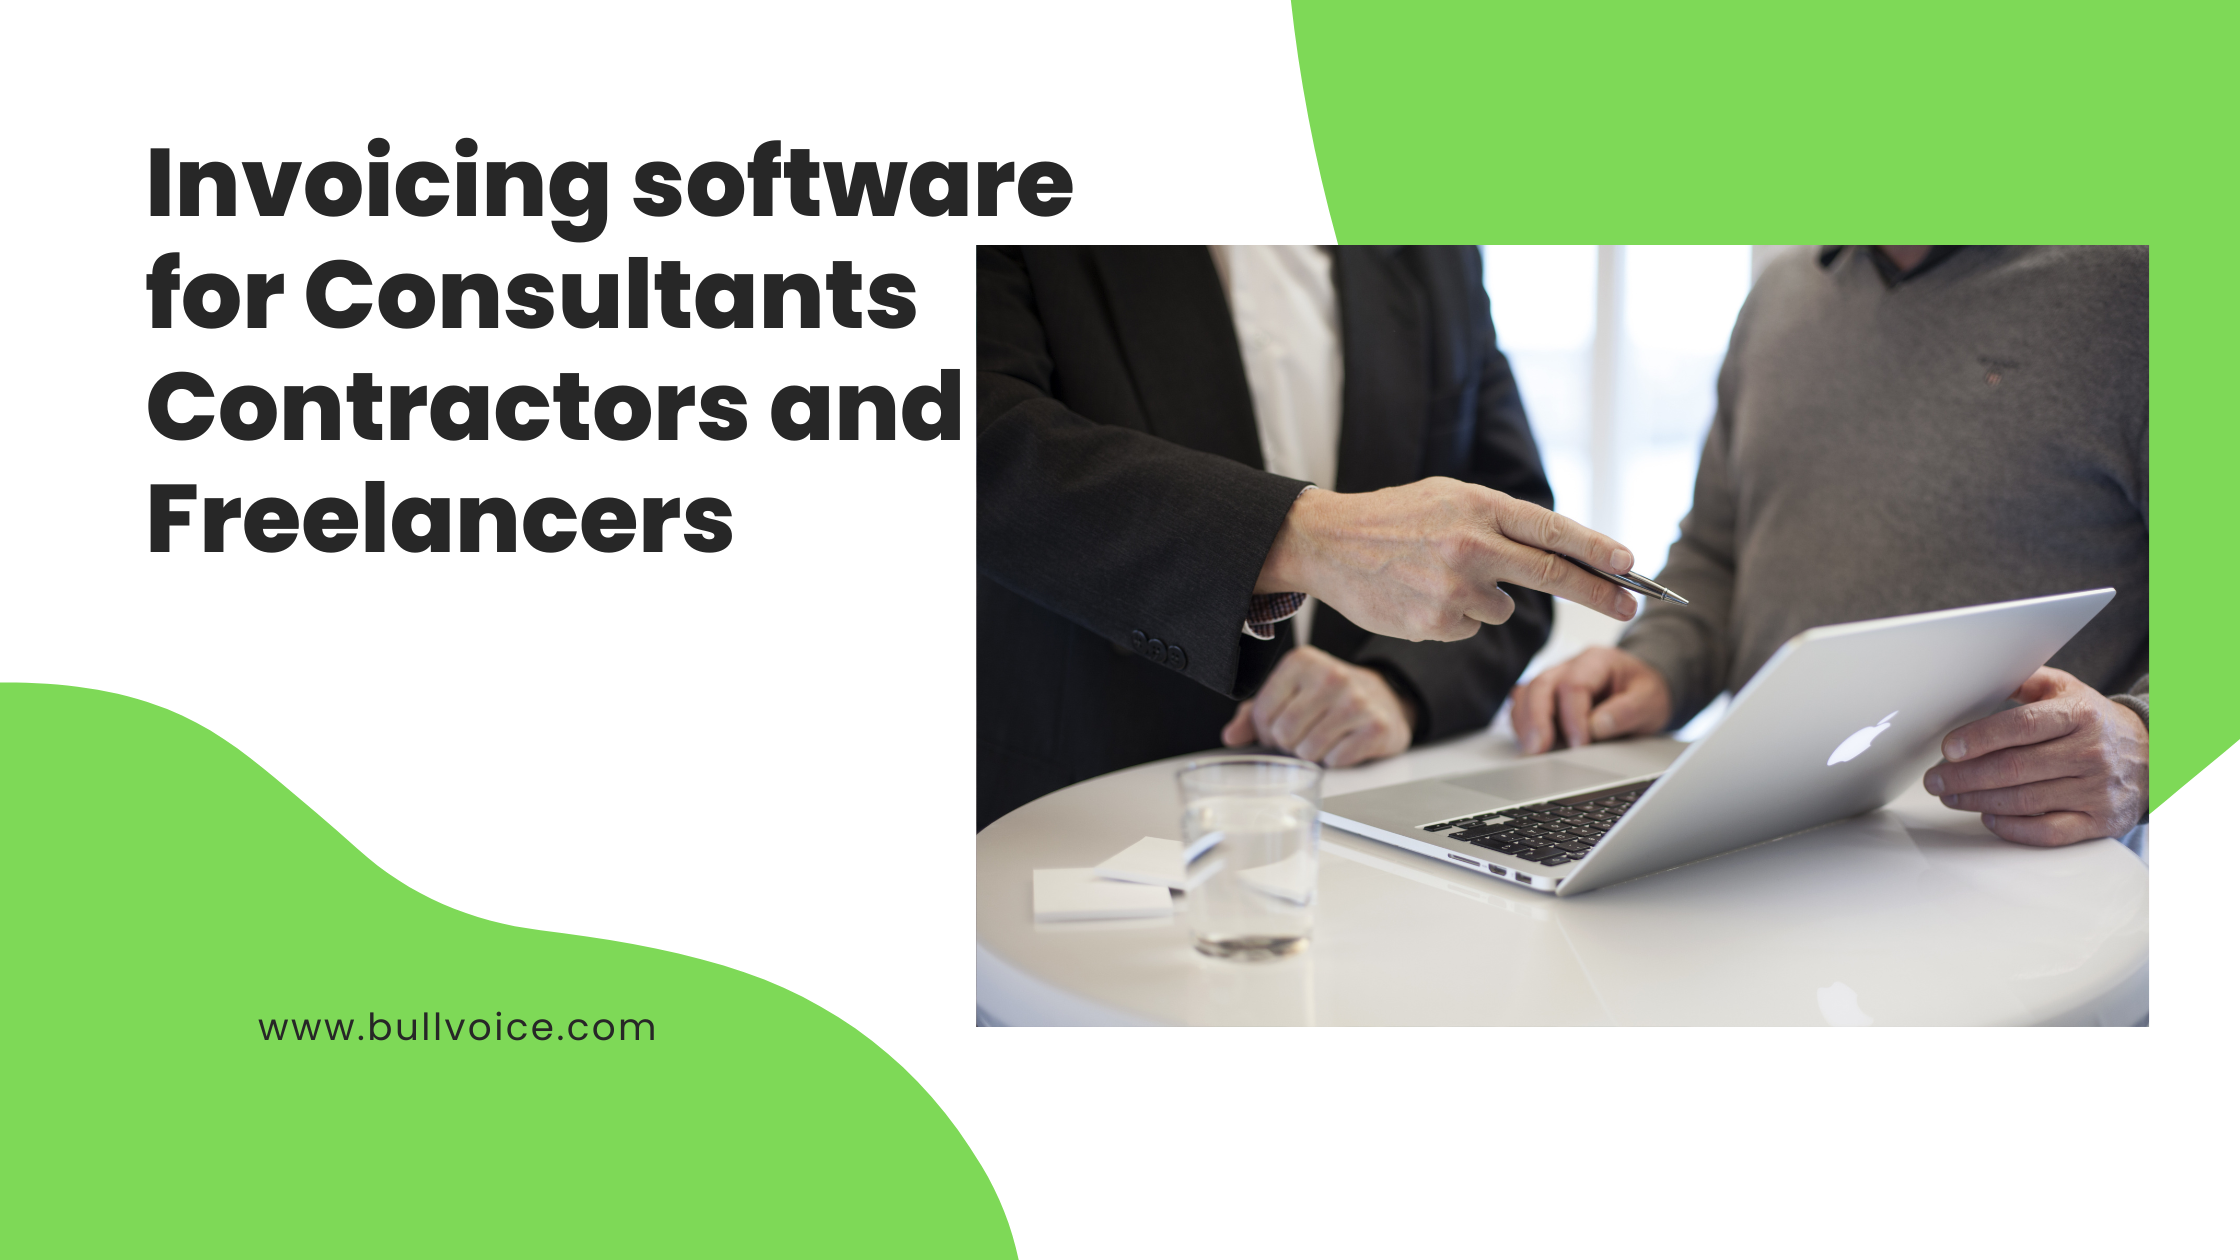 Invoicing software for Consultants Contractors and Freelancers